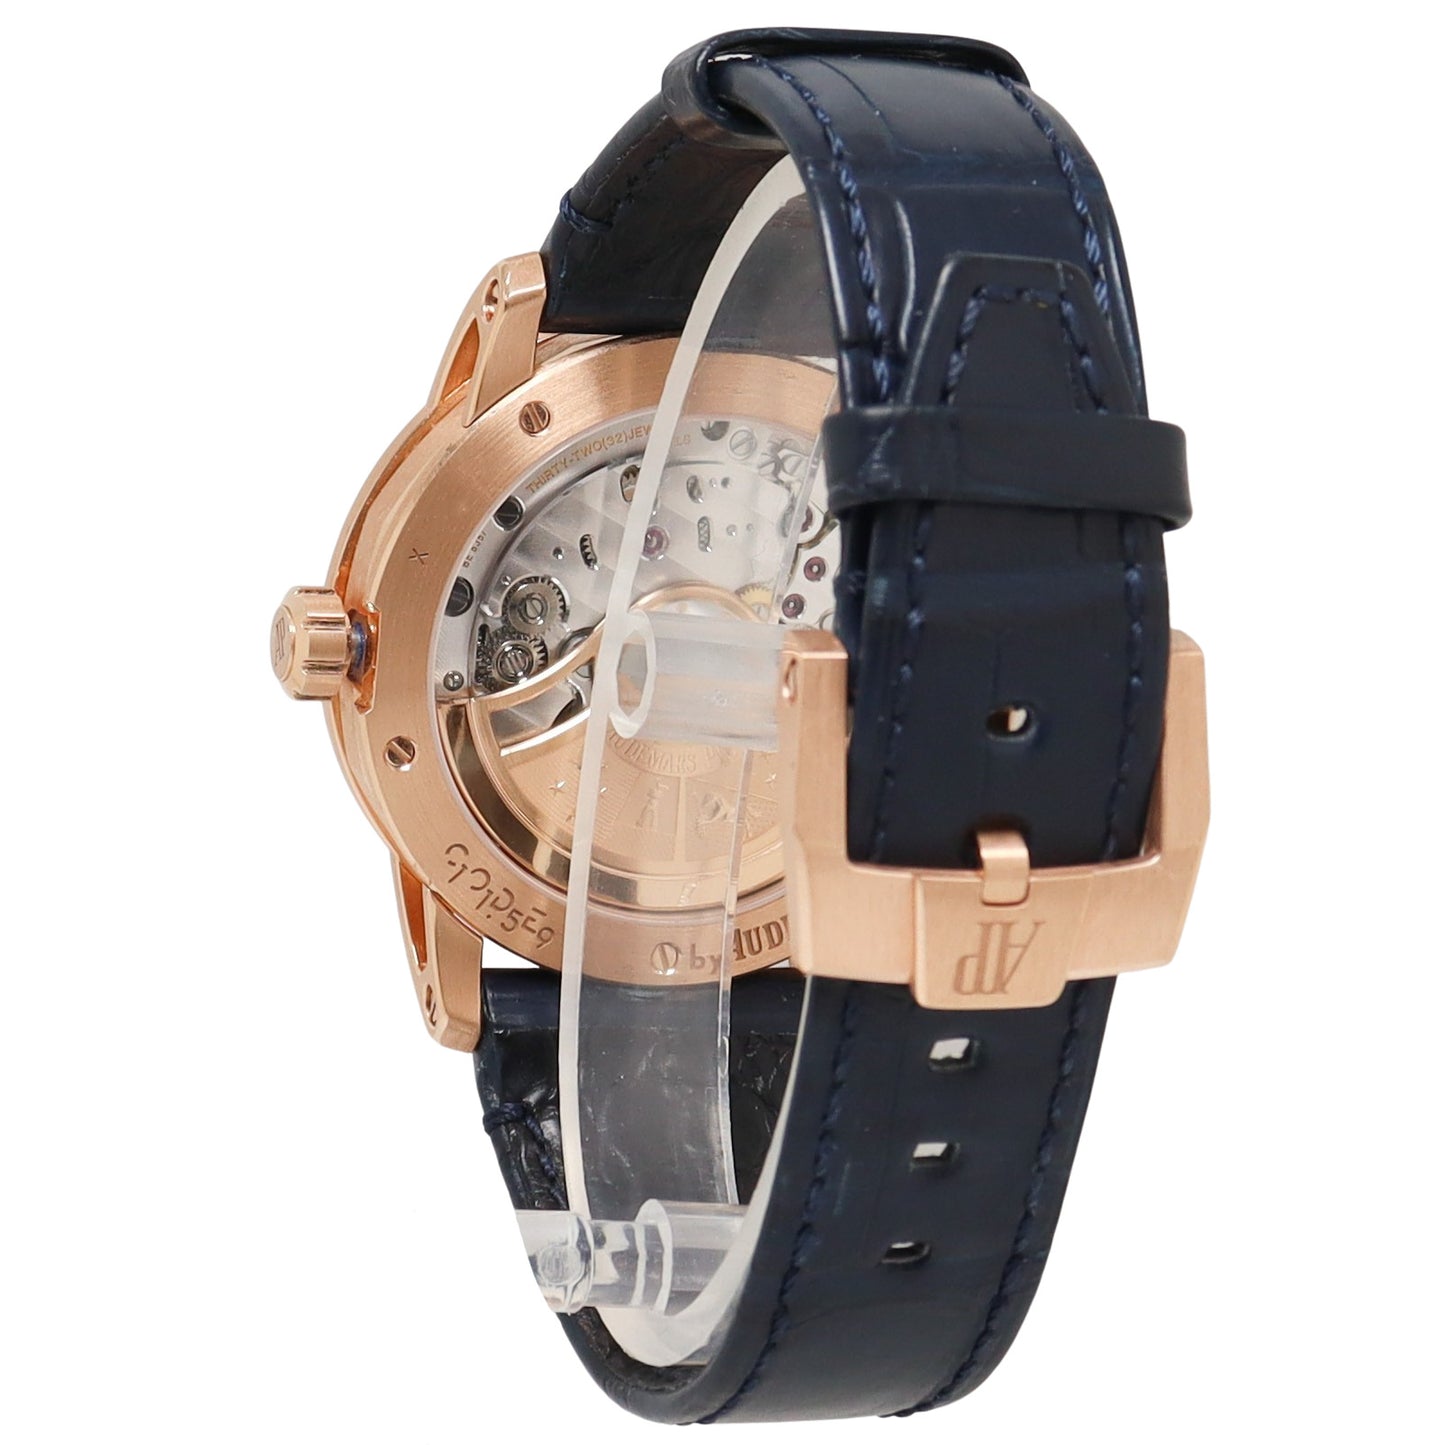 Audemars Piguet Code 11.59 Rose Gold 41mm Blue Arabic & Stick Dial Watch Reference# 15210OR.OO.A028CR.01 - Happy Jewelers Fine Jewelry Lifetime Warranty